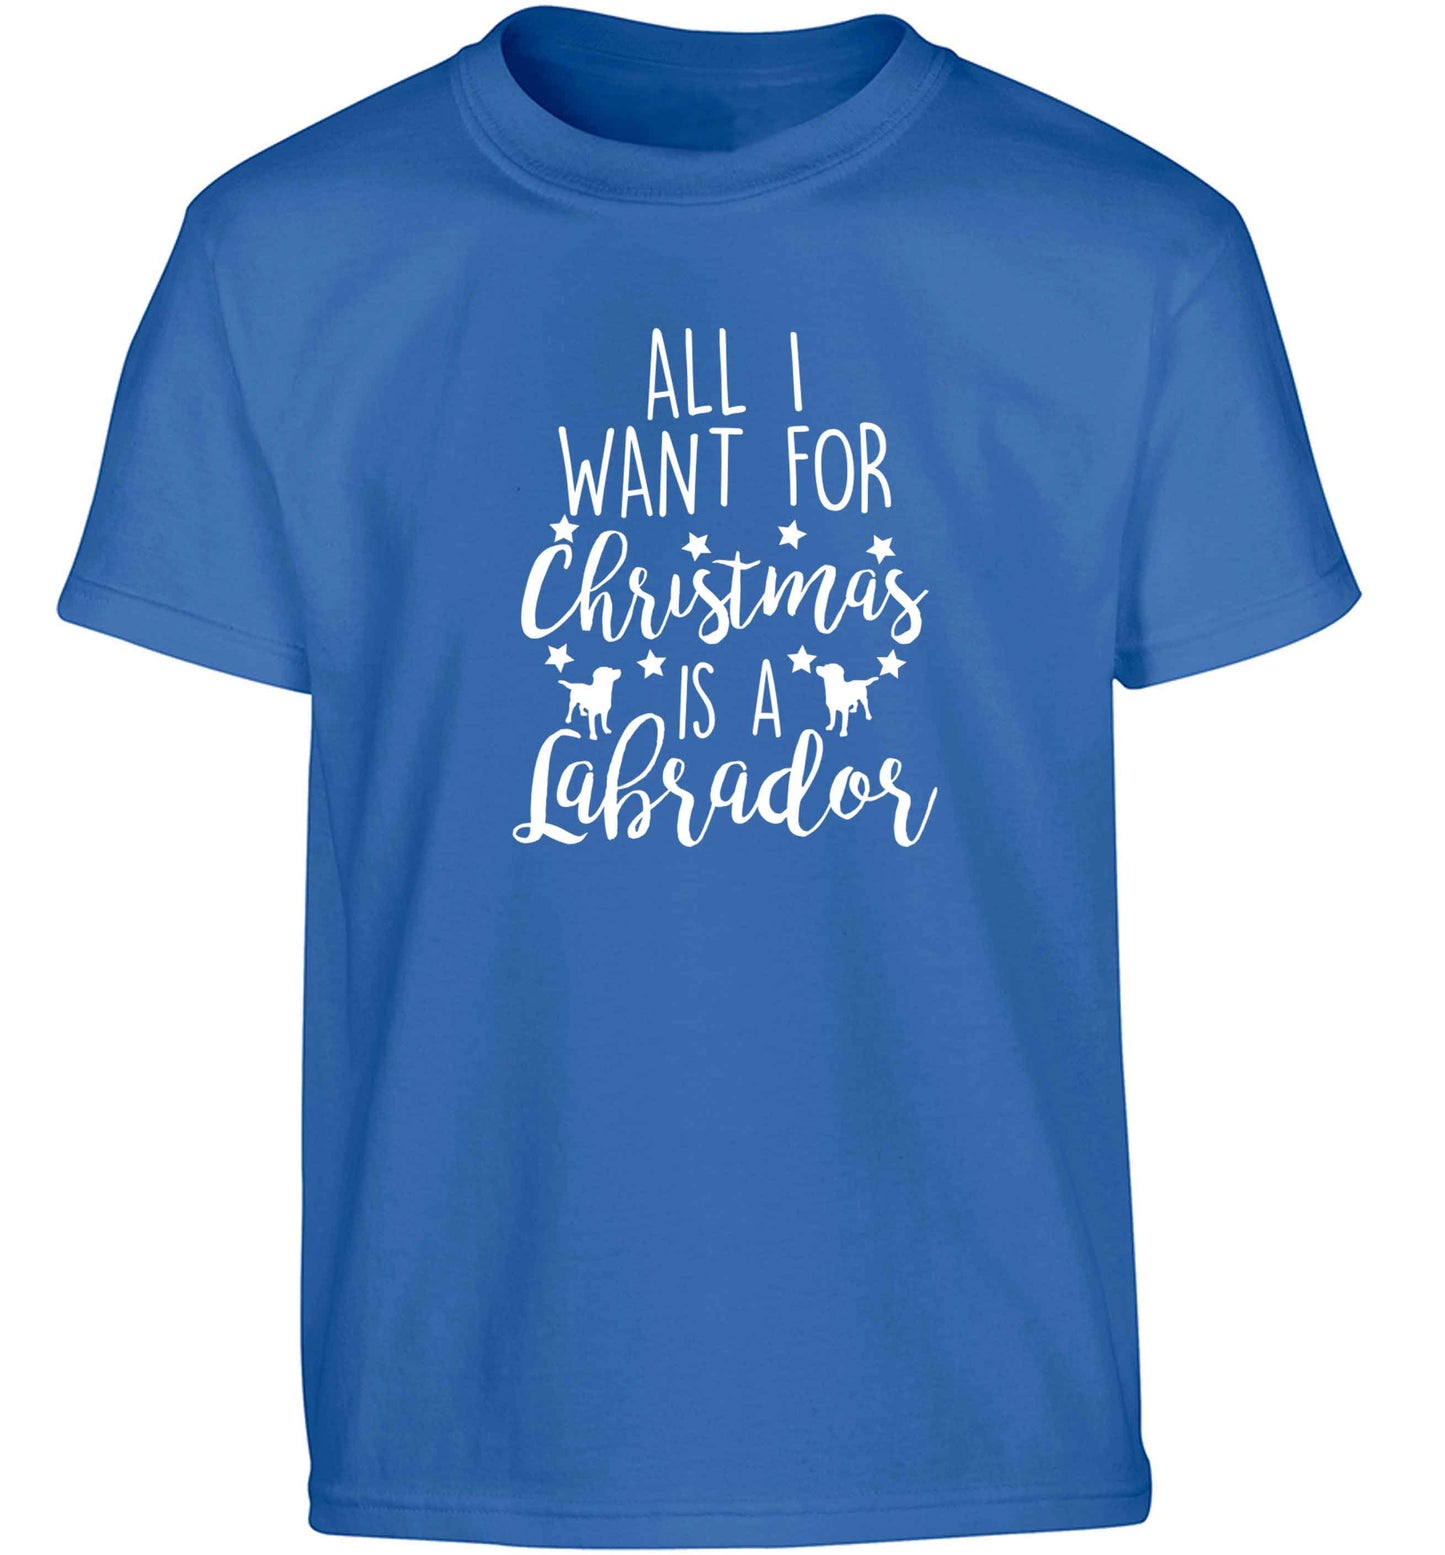 All I want for Christmas is a labrador Children's blue Tshirt 12-13 Years